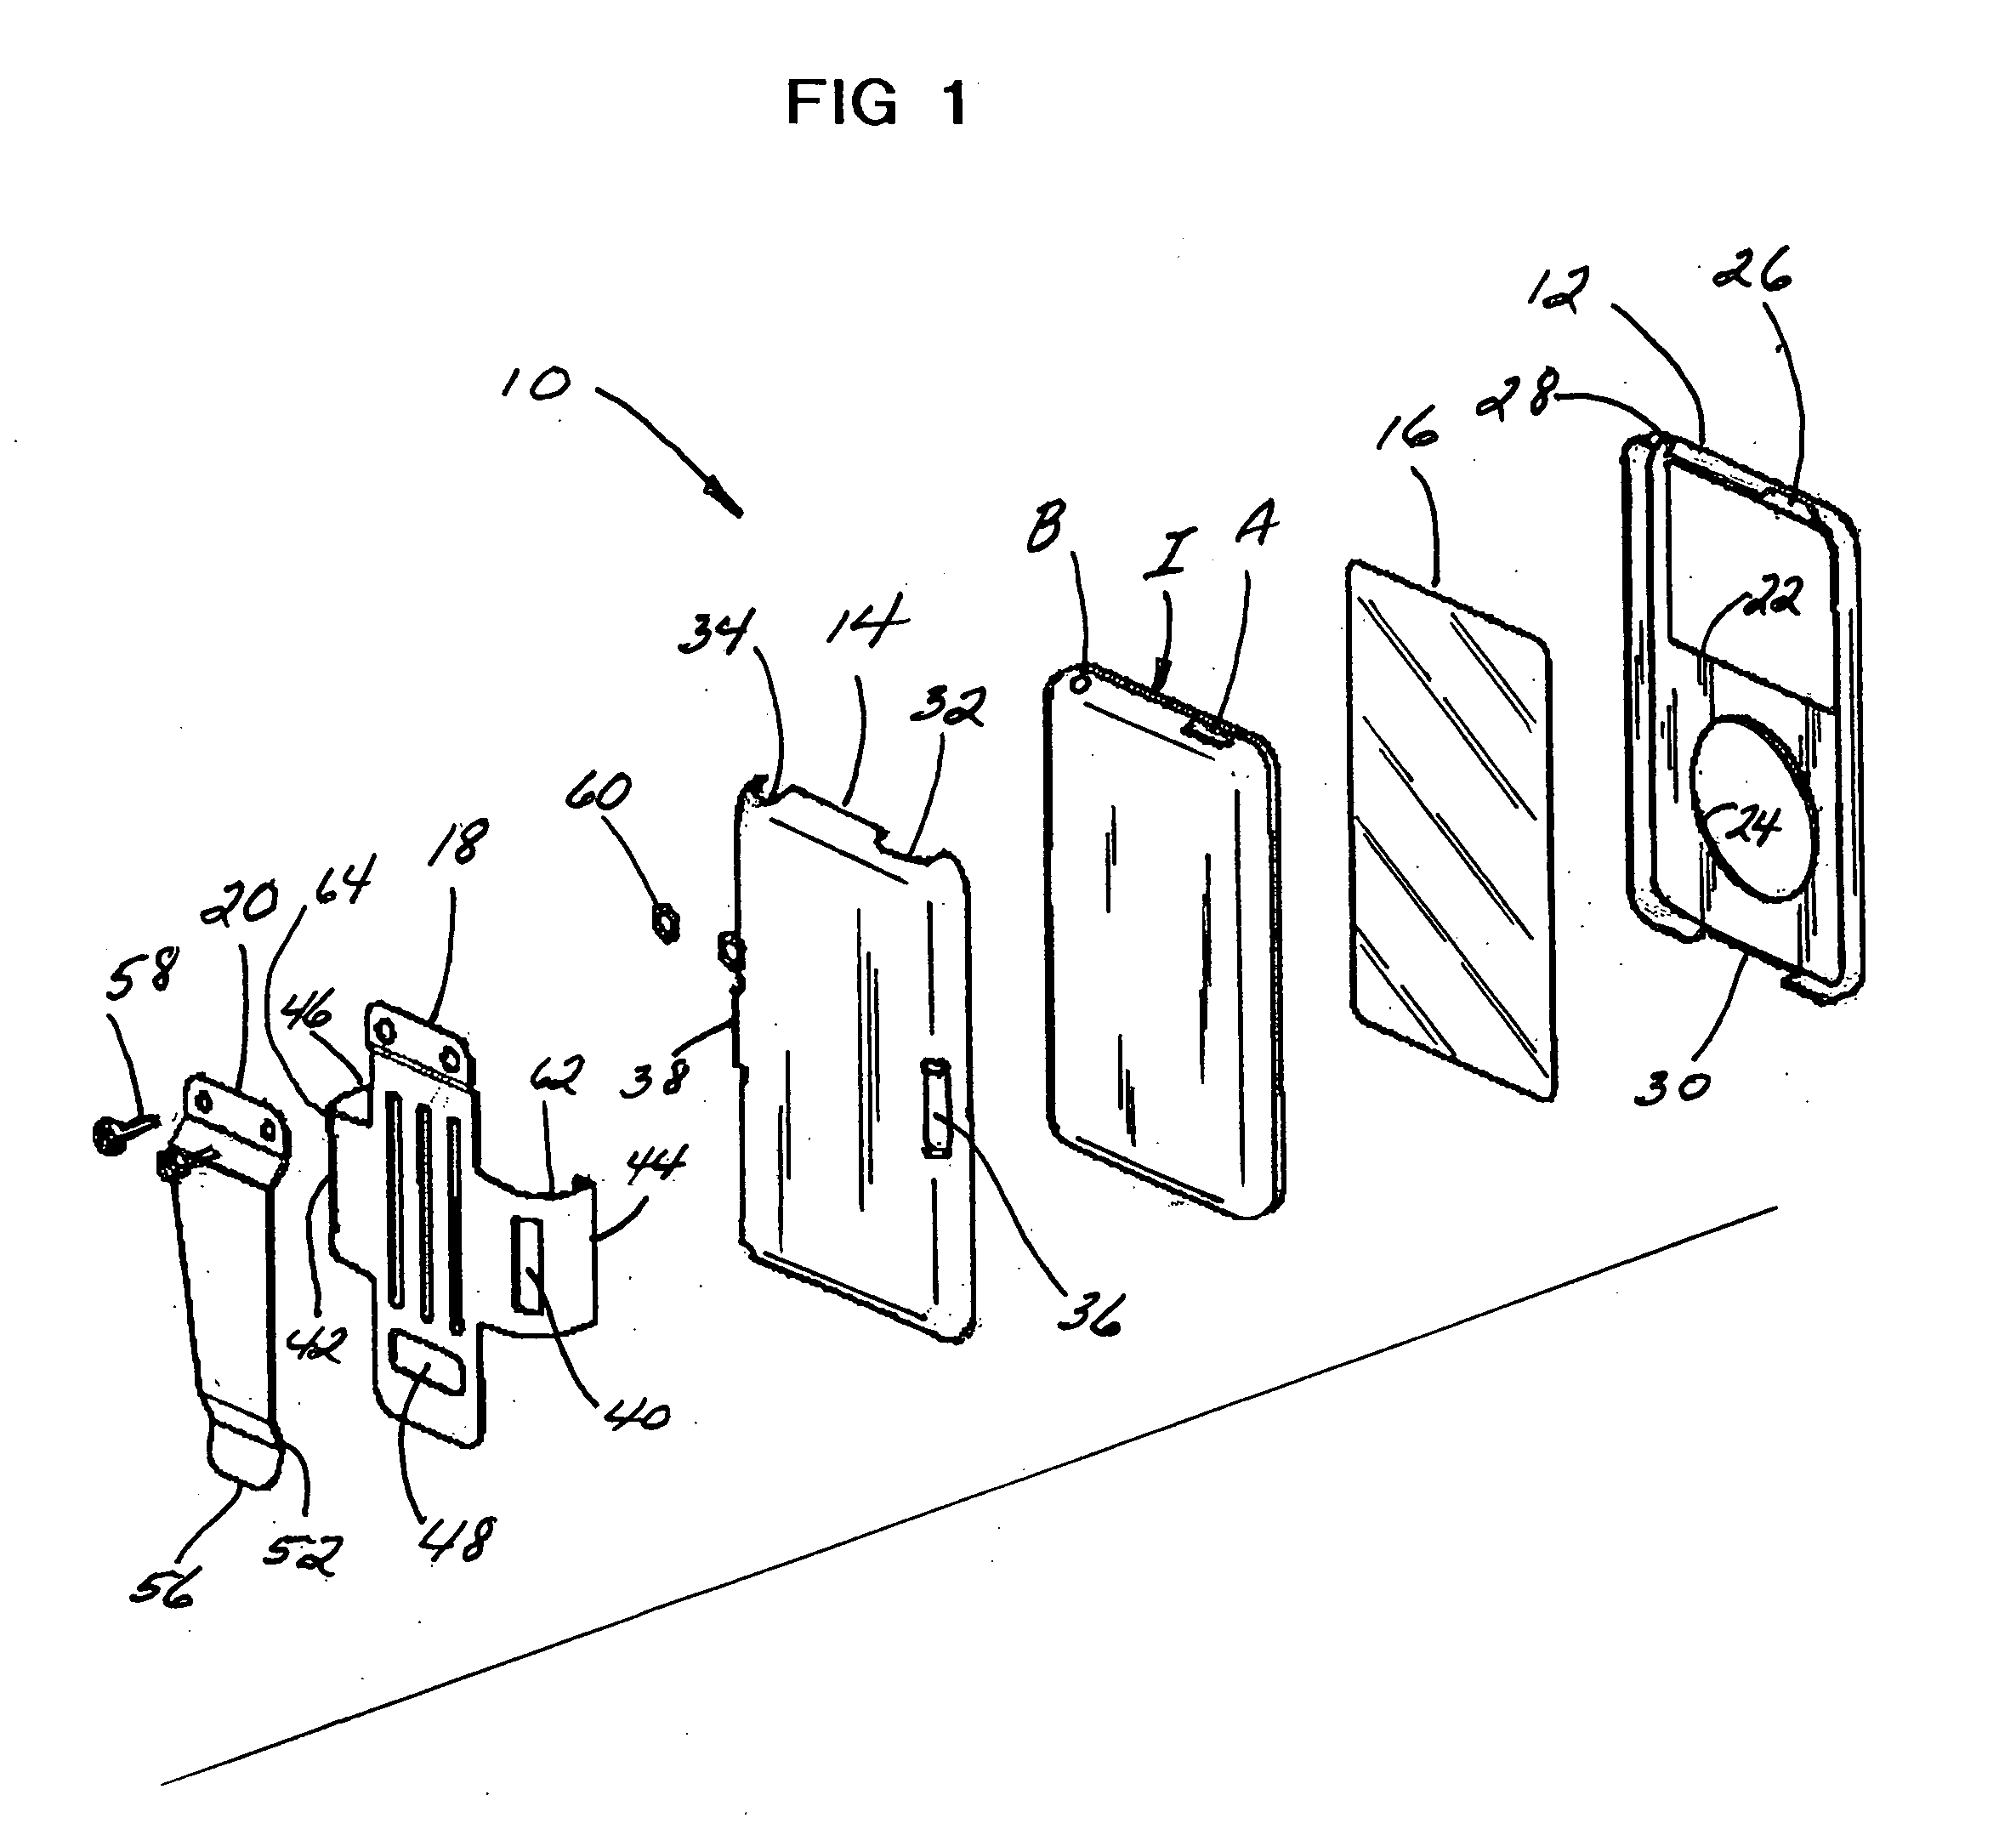 Protective enclosure for personal electronic devices